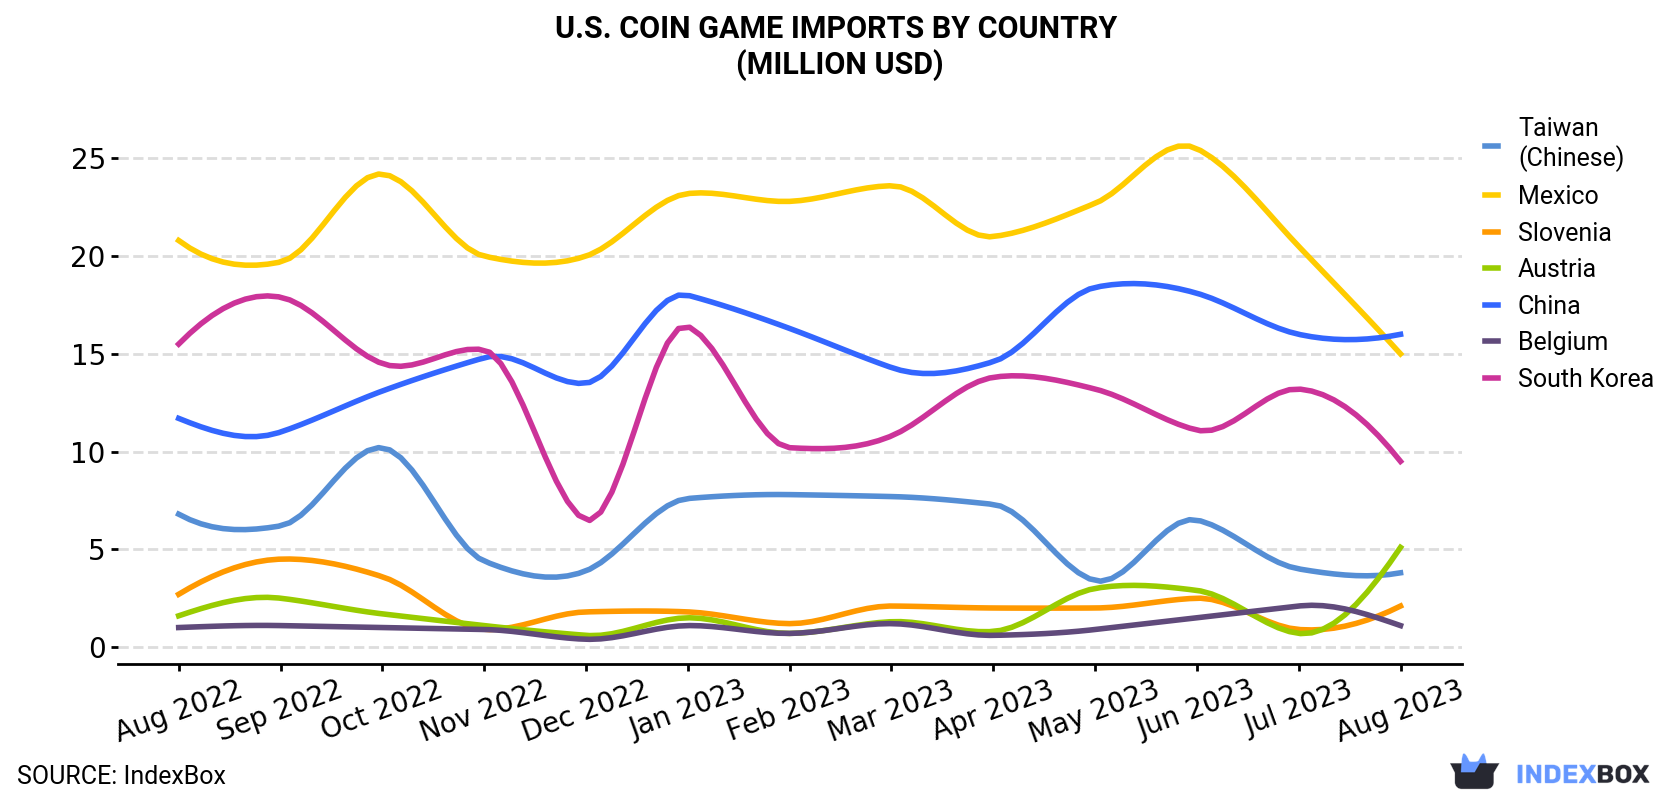 U.S. Coin Game Imports By Country (Million USD)